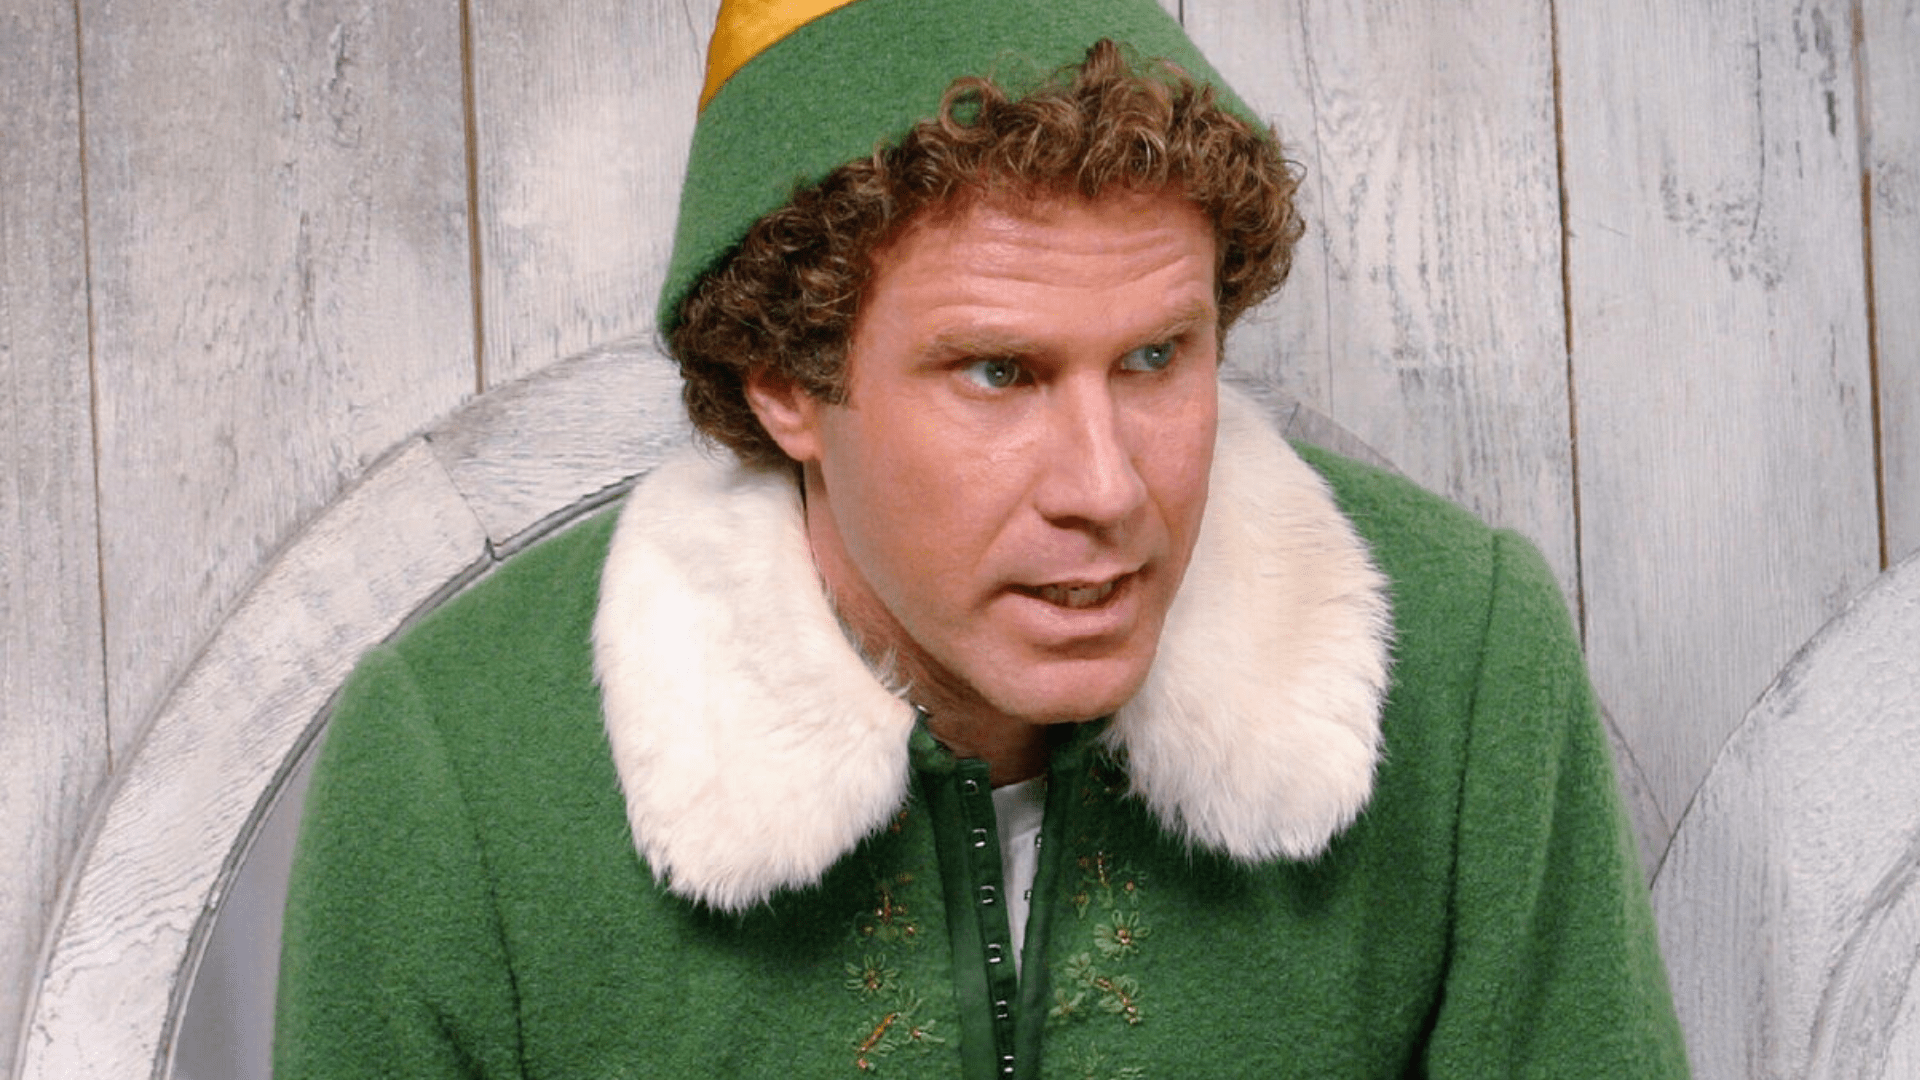 Elf Facts - 64 Elf (2003) Facts To Get You In The Festive Spirit